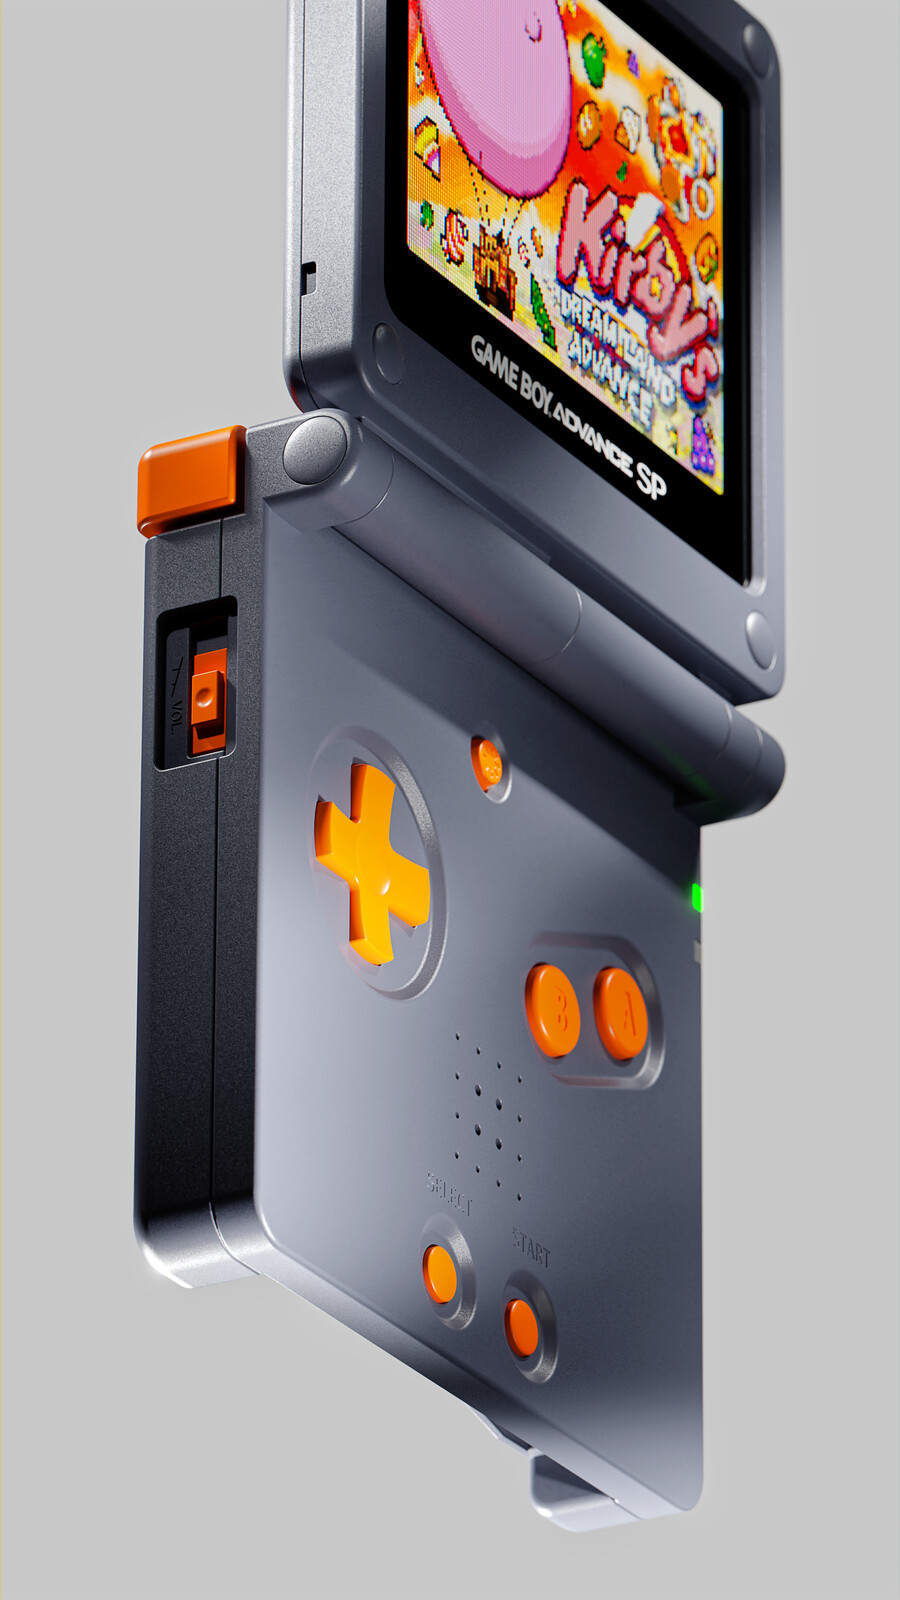 From Pocket to Pixels: Gameboy Advance SP in 3D